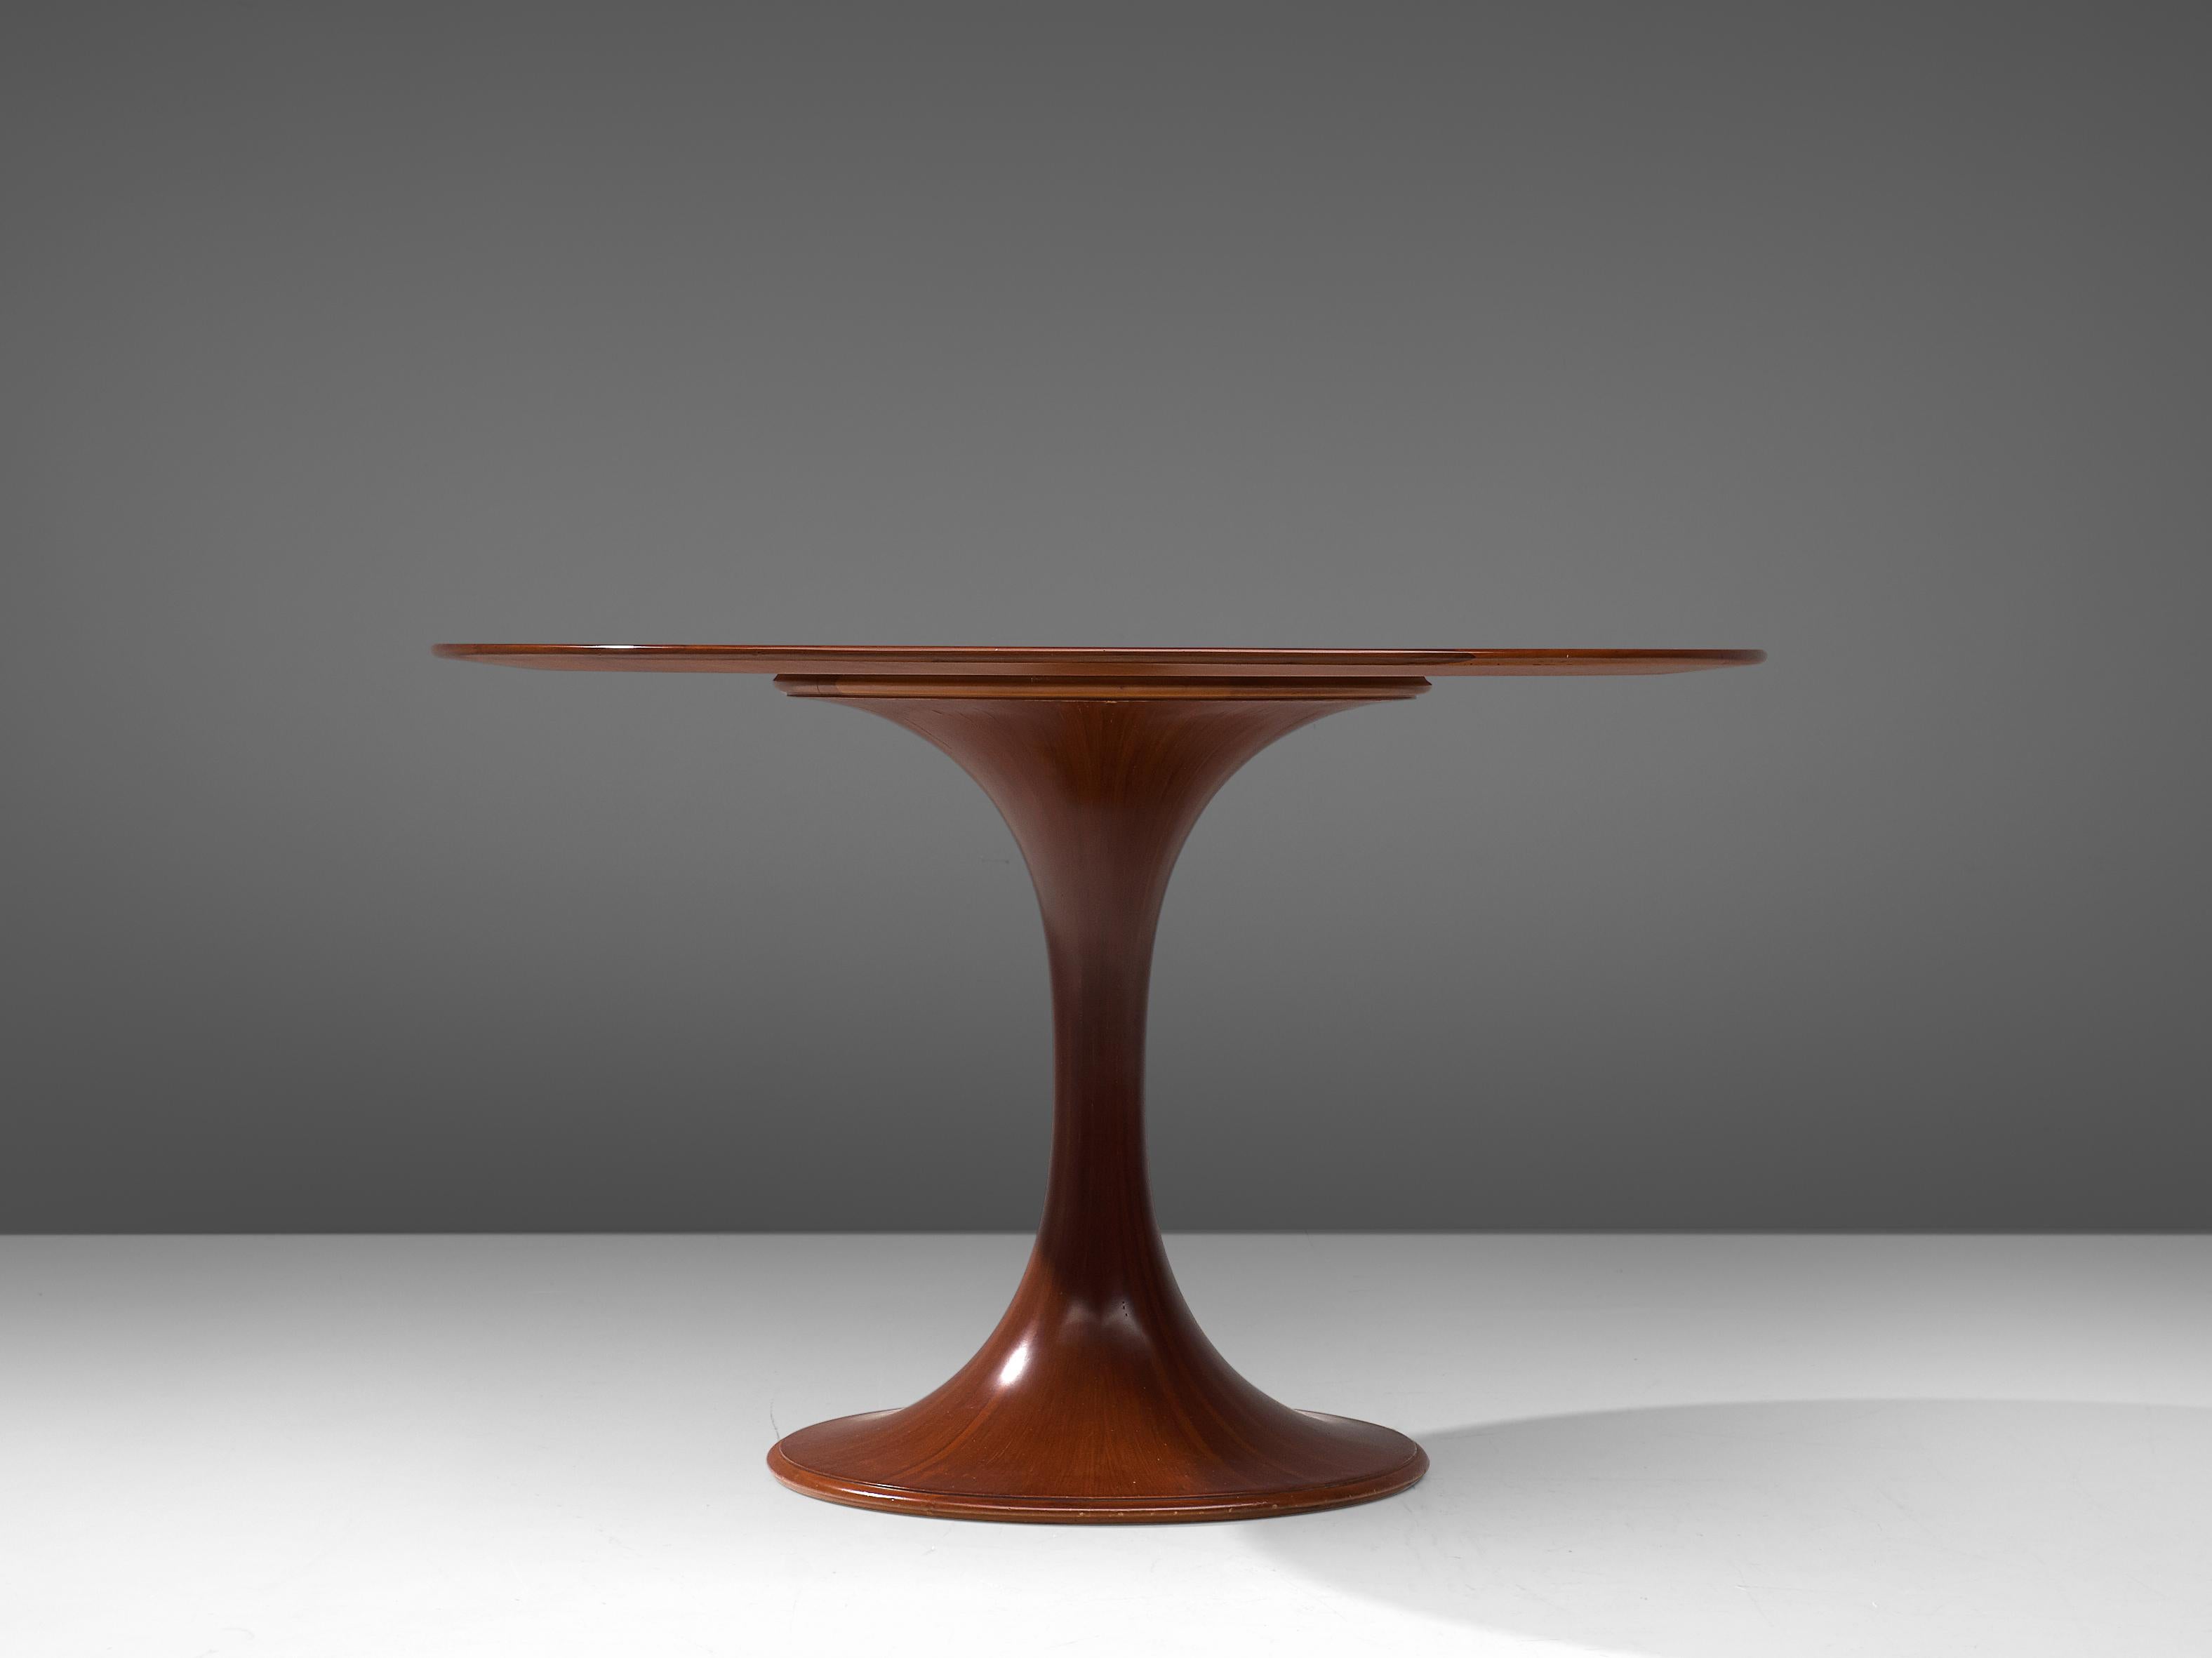 Luigi Massoni, dining table, model 2101, walnut, Italy, 1950s. 

Round pedestal dining table by Italian designer Luigi Massoni. Beautiful detailed pedestal feet, with excellent woodwork which creates a beautiful layered expression. The round walnut